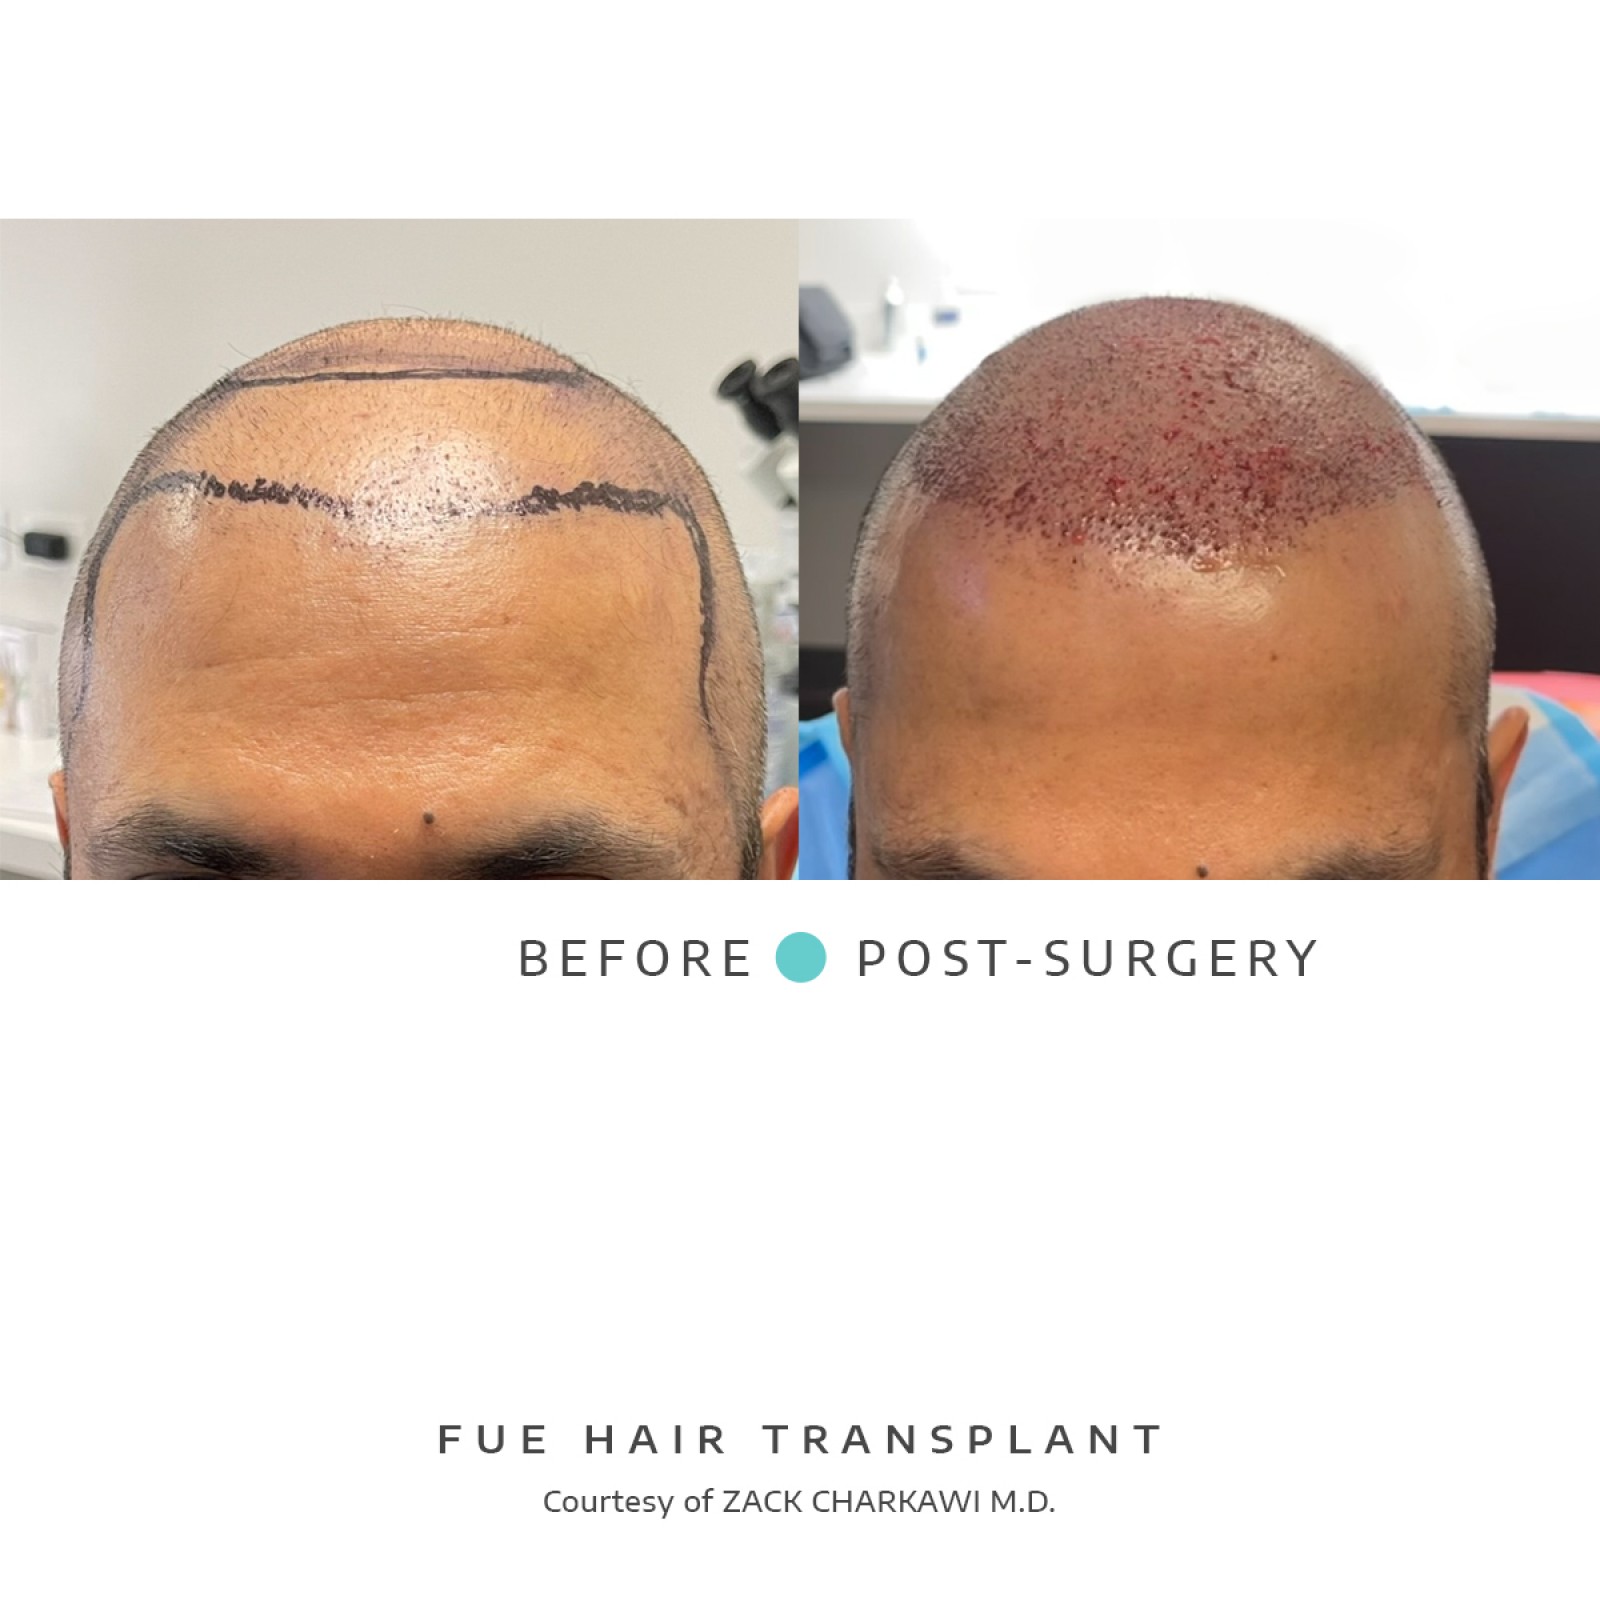 The before image shows a close-up of a man's scalp with hair loss. The after image reveals the freshly transplanted area after a hair transplant, with lush, natural-looking hair concealing previous bald patches.